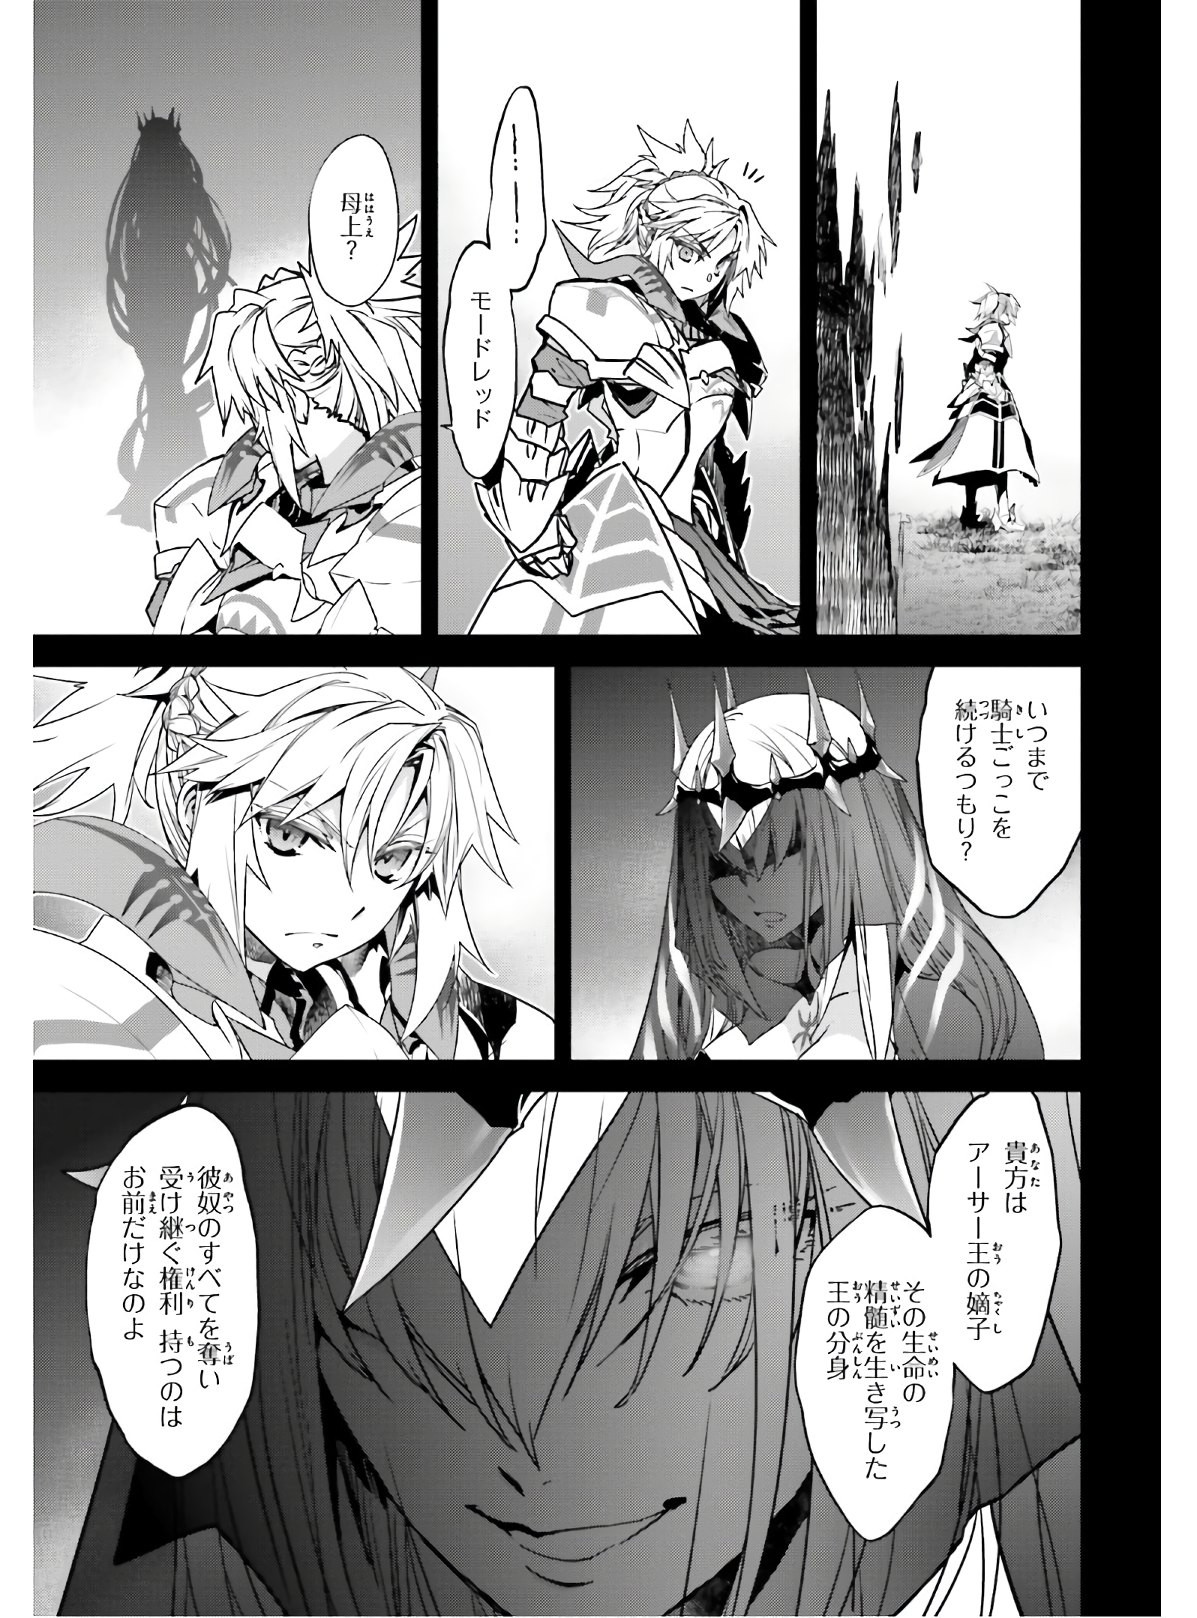 Fate-Apocrypha - Chapter 42 - Page 7